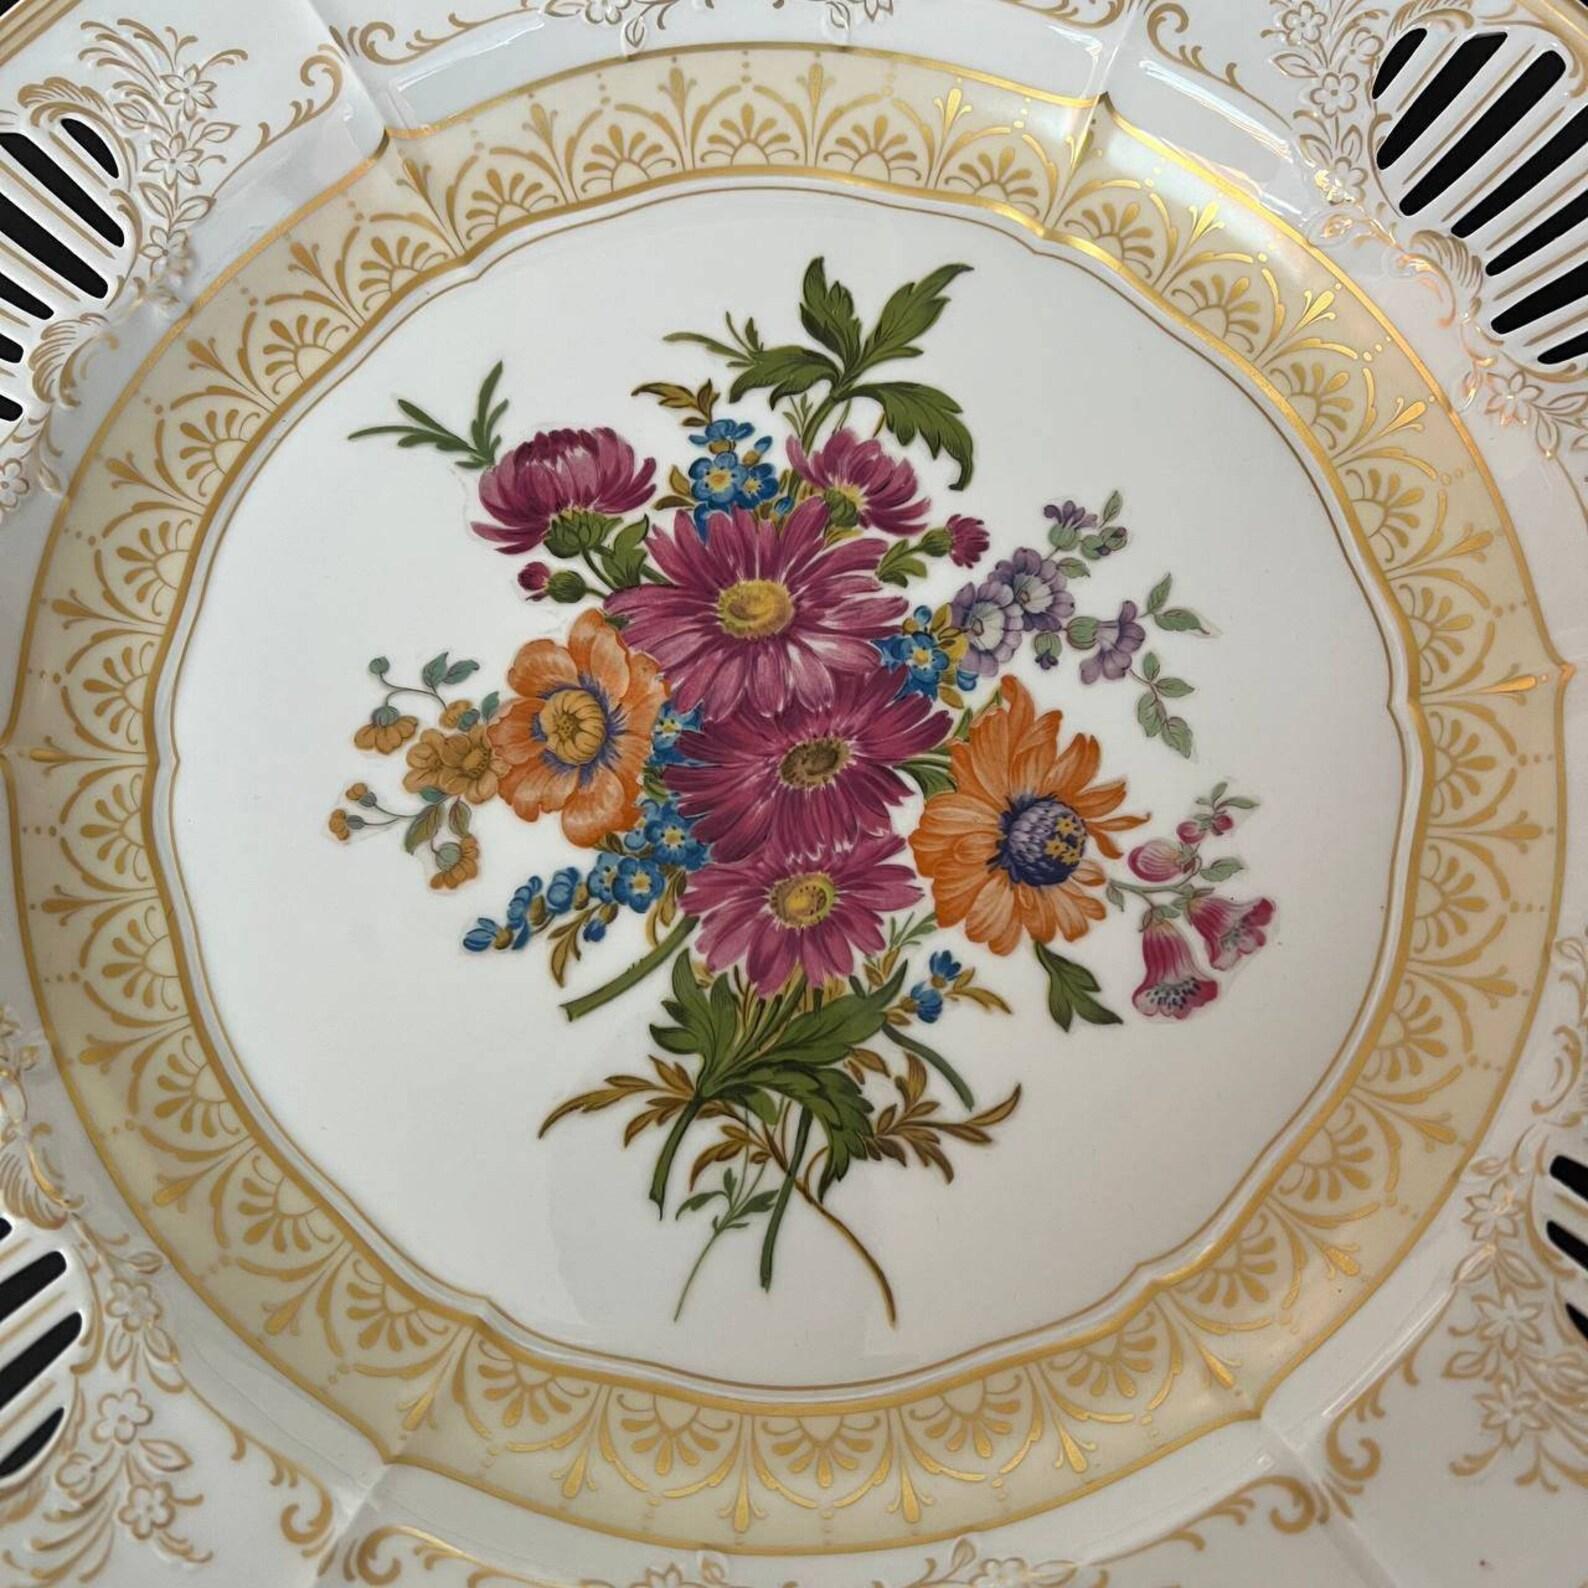  Large decorative Plate from the famous Kaiser German Manufactory. 

  Produced in 1960s. 

 German large decorative plate made of porcelain with a floral pattern, gilded 24 carats of the Victorian period of the middle 20th century. 

 A harmonious